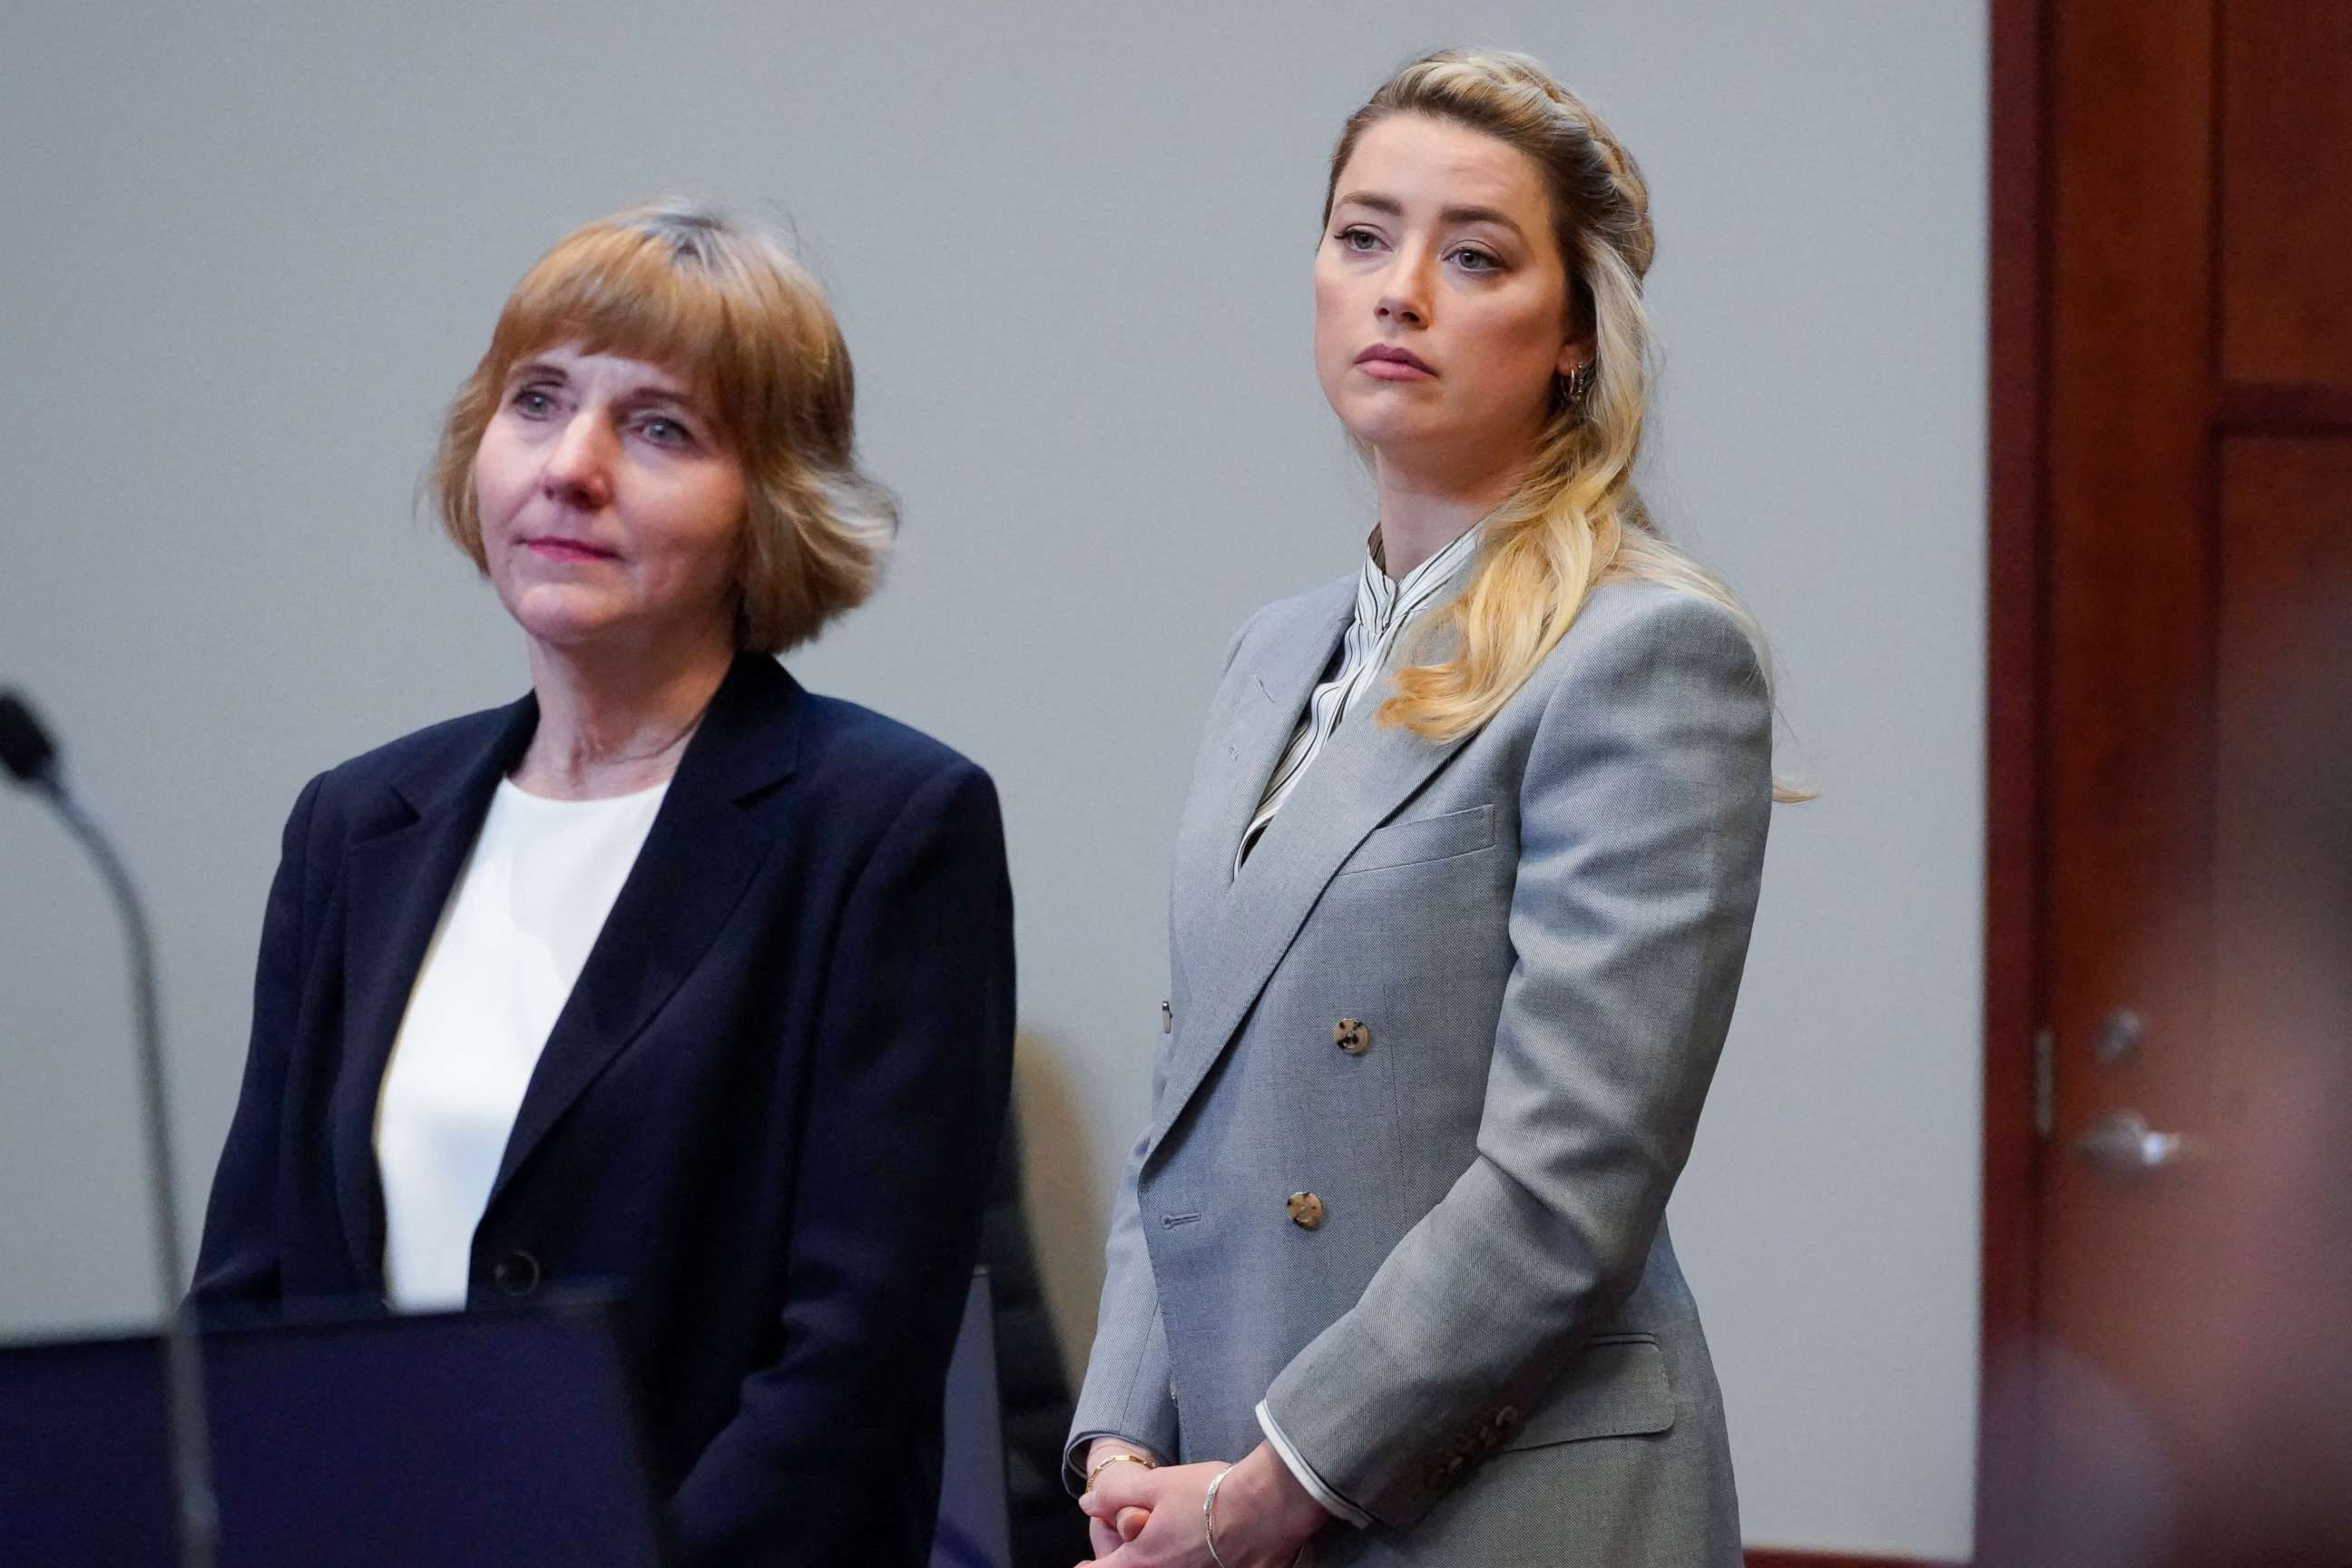 PHOTO: Actor Amber Heard stands with her attorney attorney Elaine Bredehoft before closing arguments in the Depp v. Heard trial at the Fairfax County Circuit Courthouse in Fairfax, Virginia, May 27, 2022.